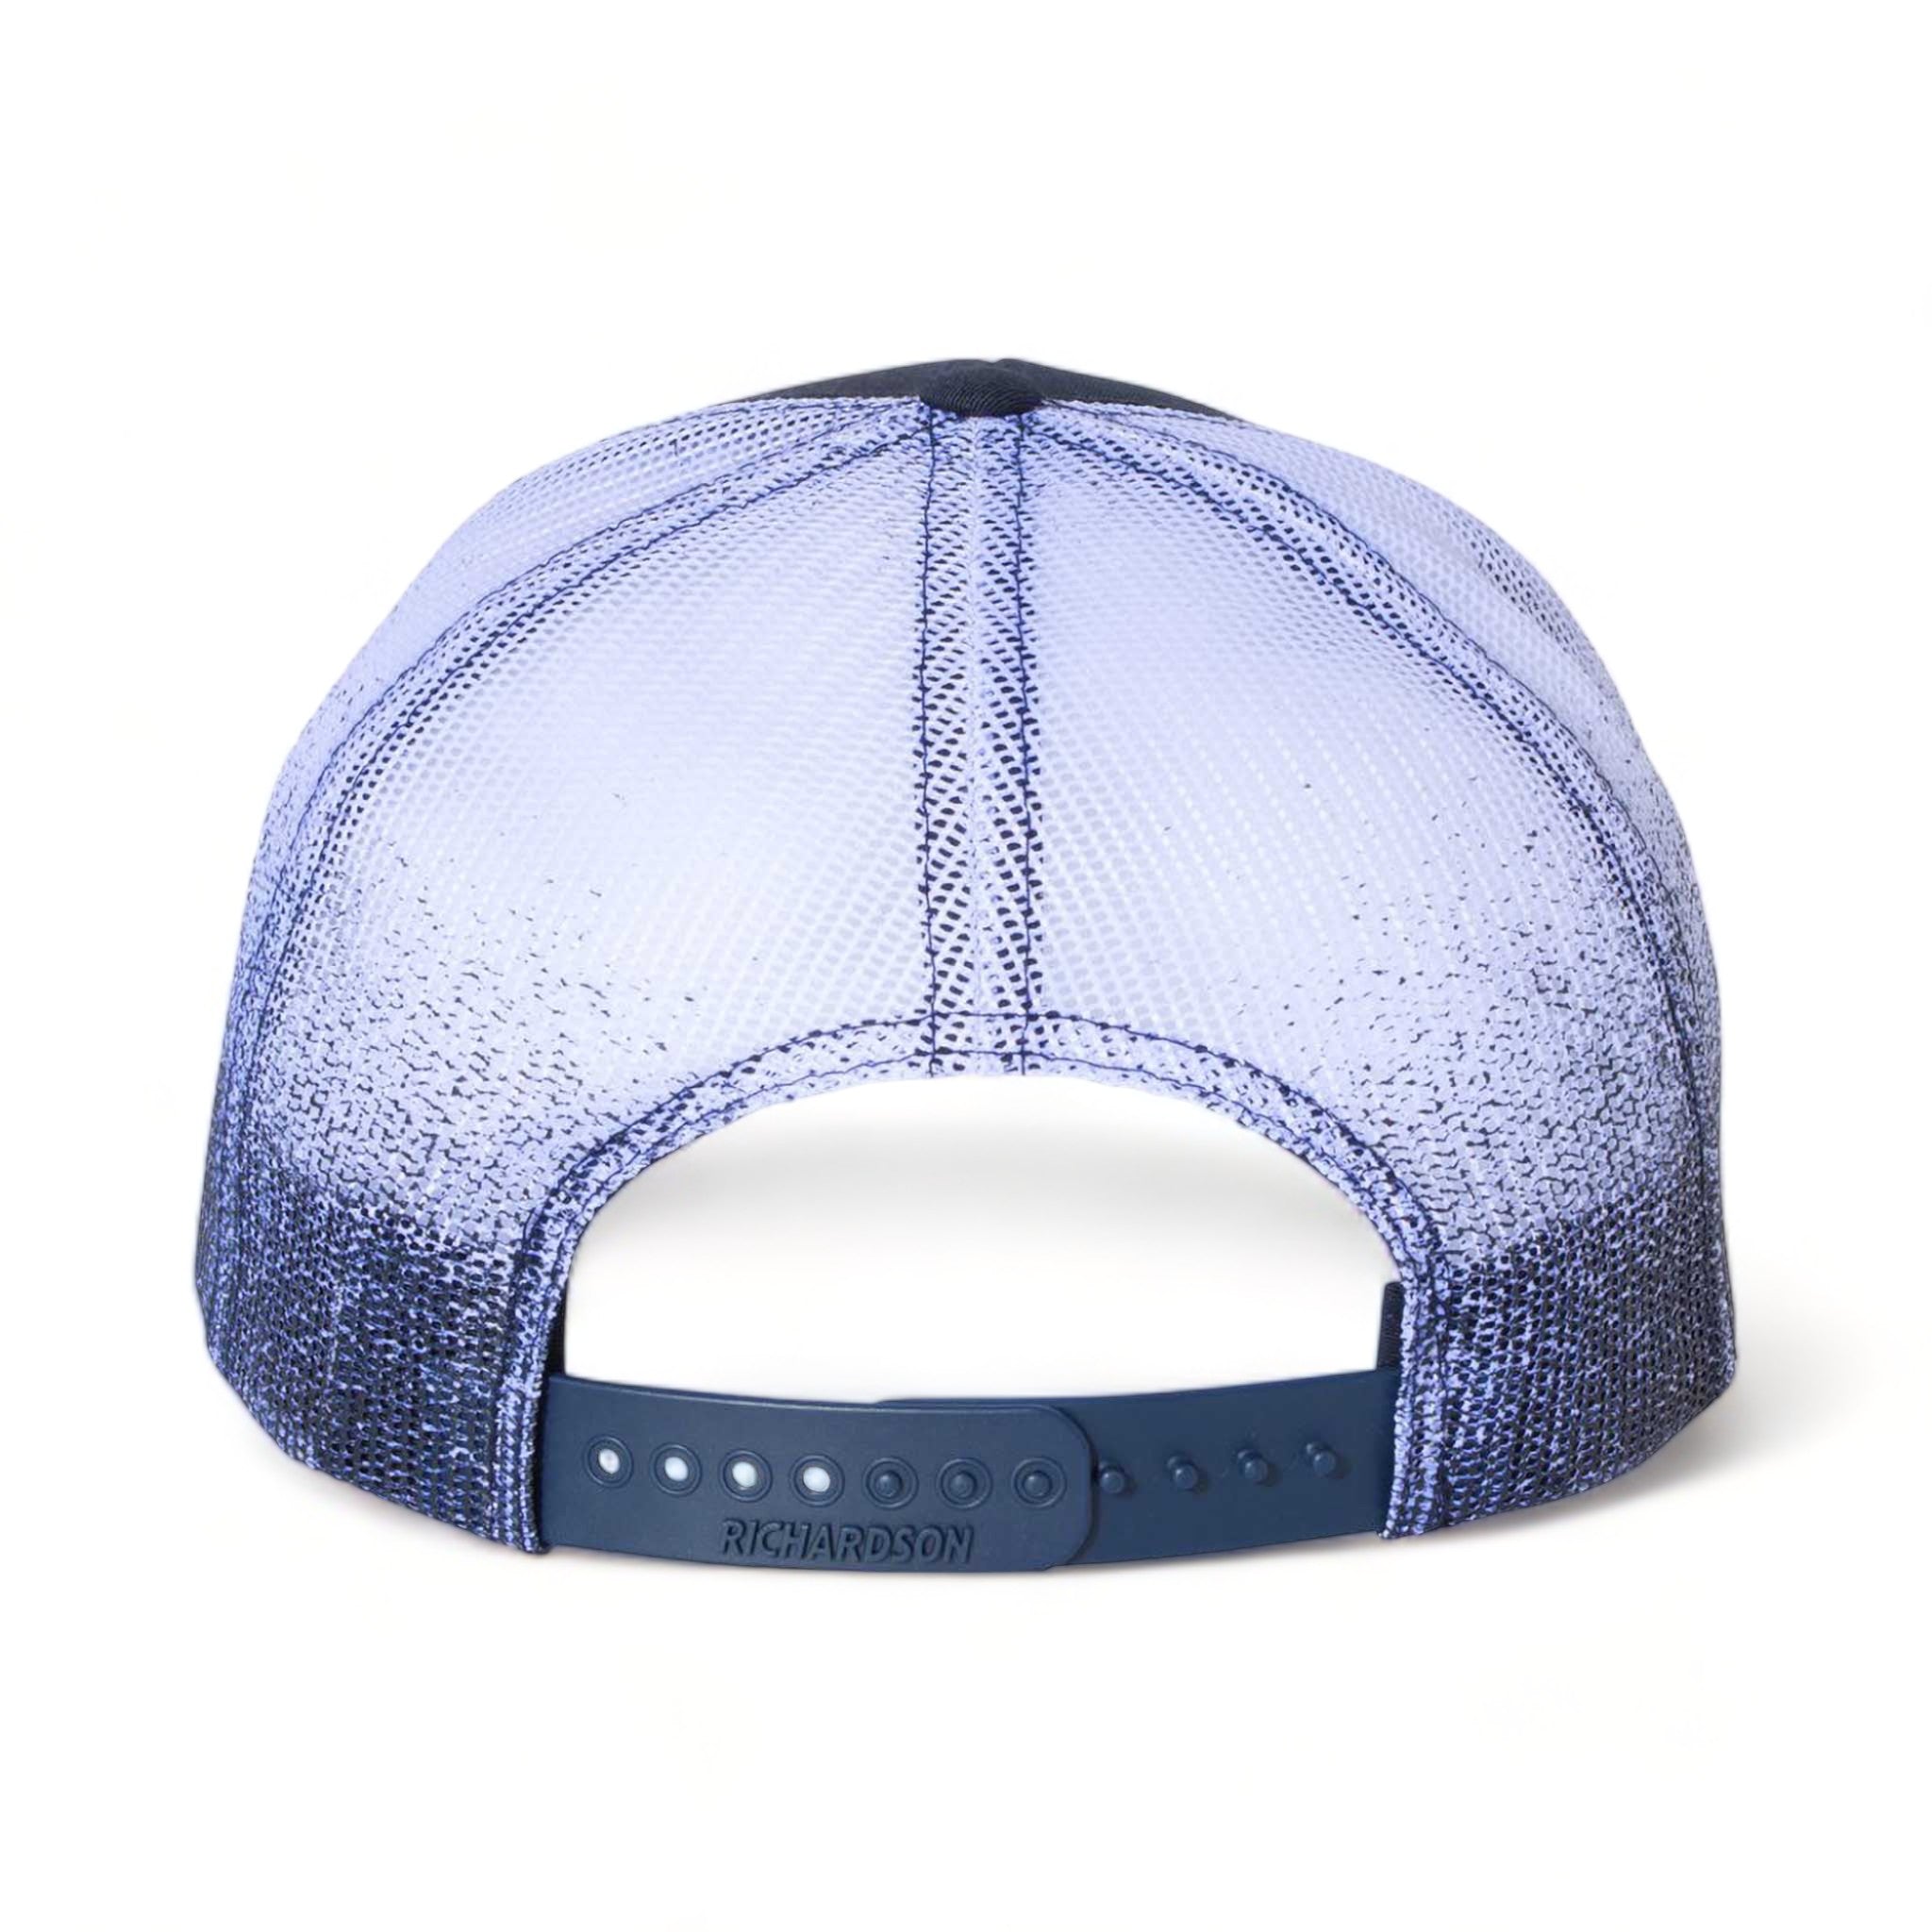 Back view of Richardson 112PM custom hat in navy and navy to white fade